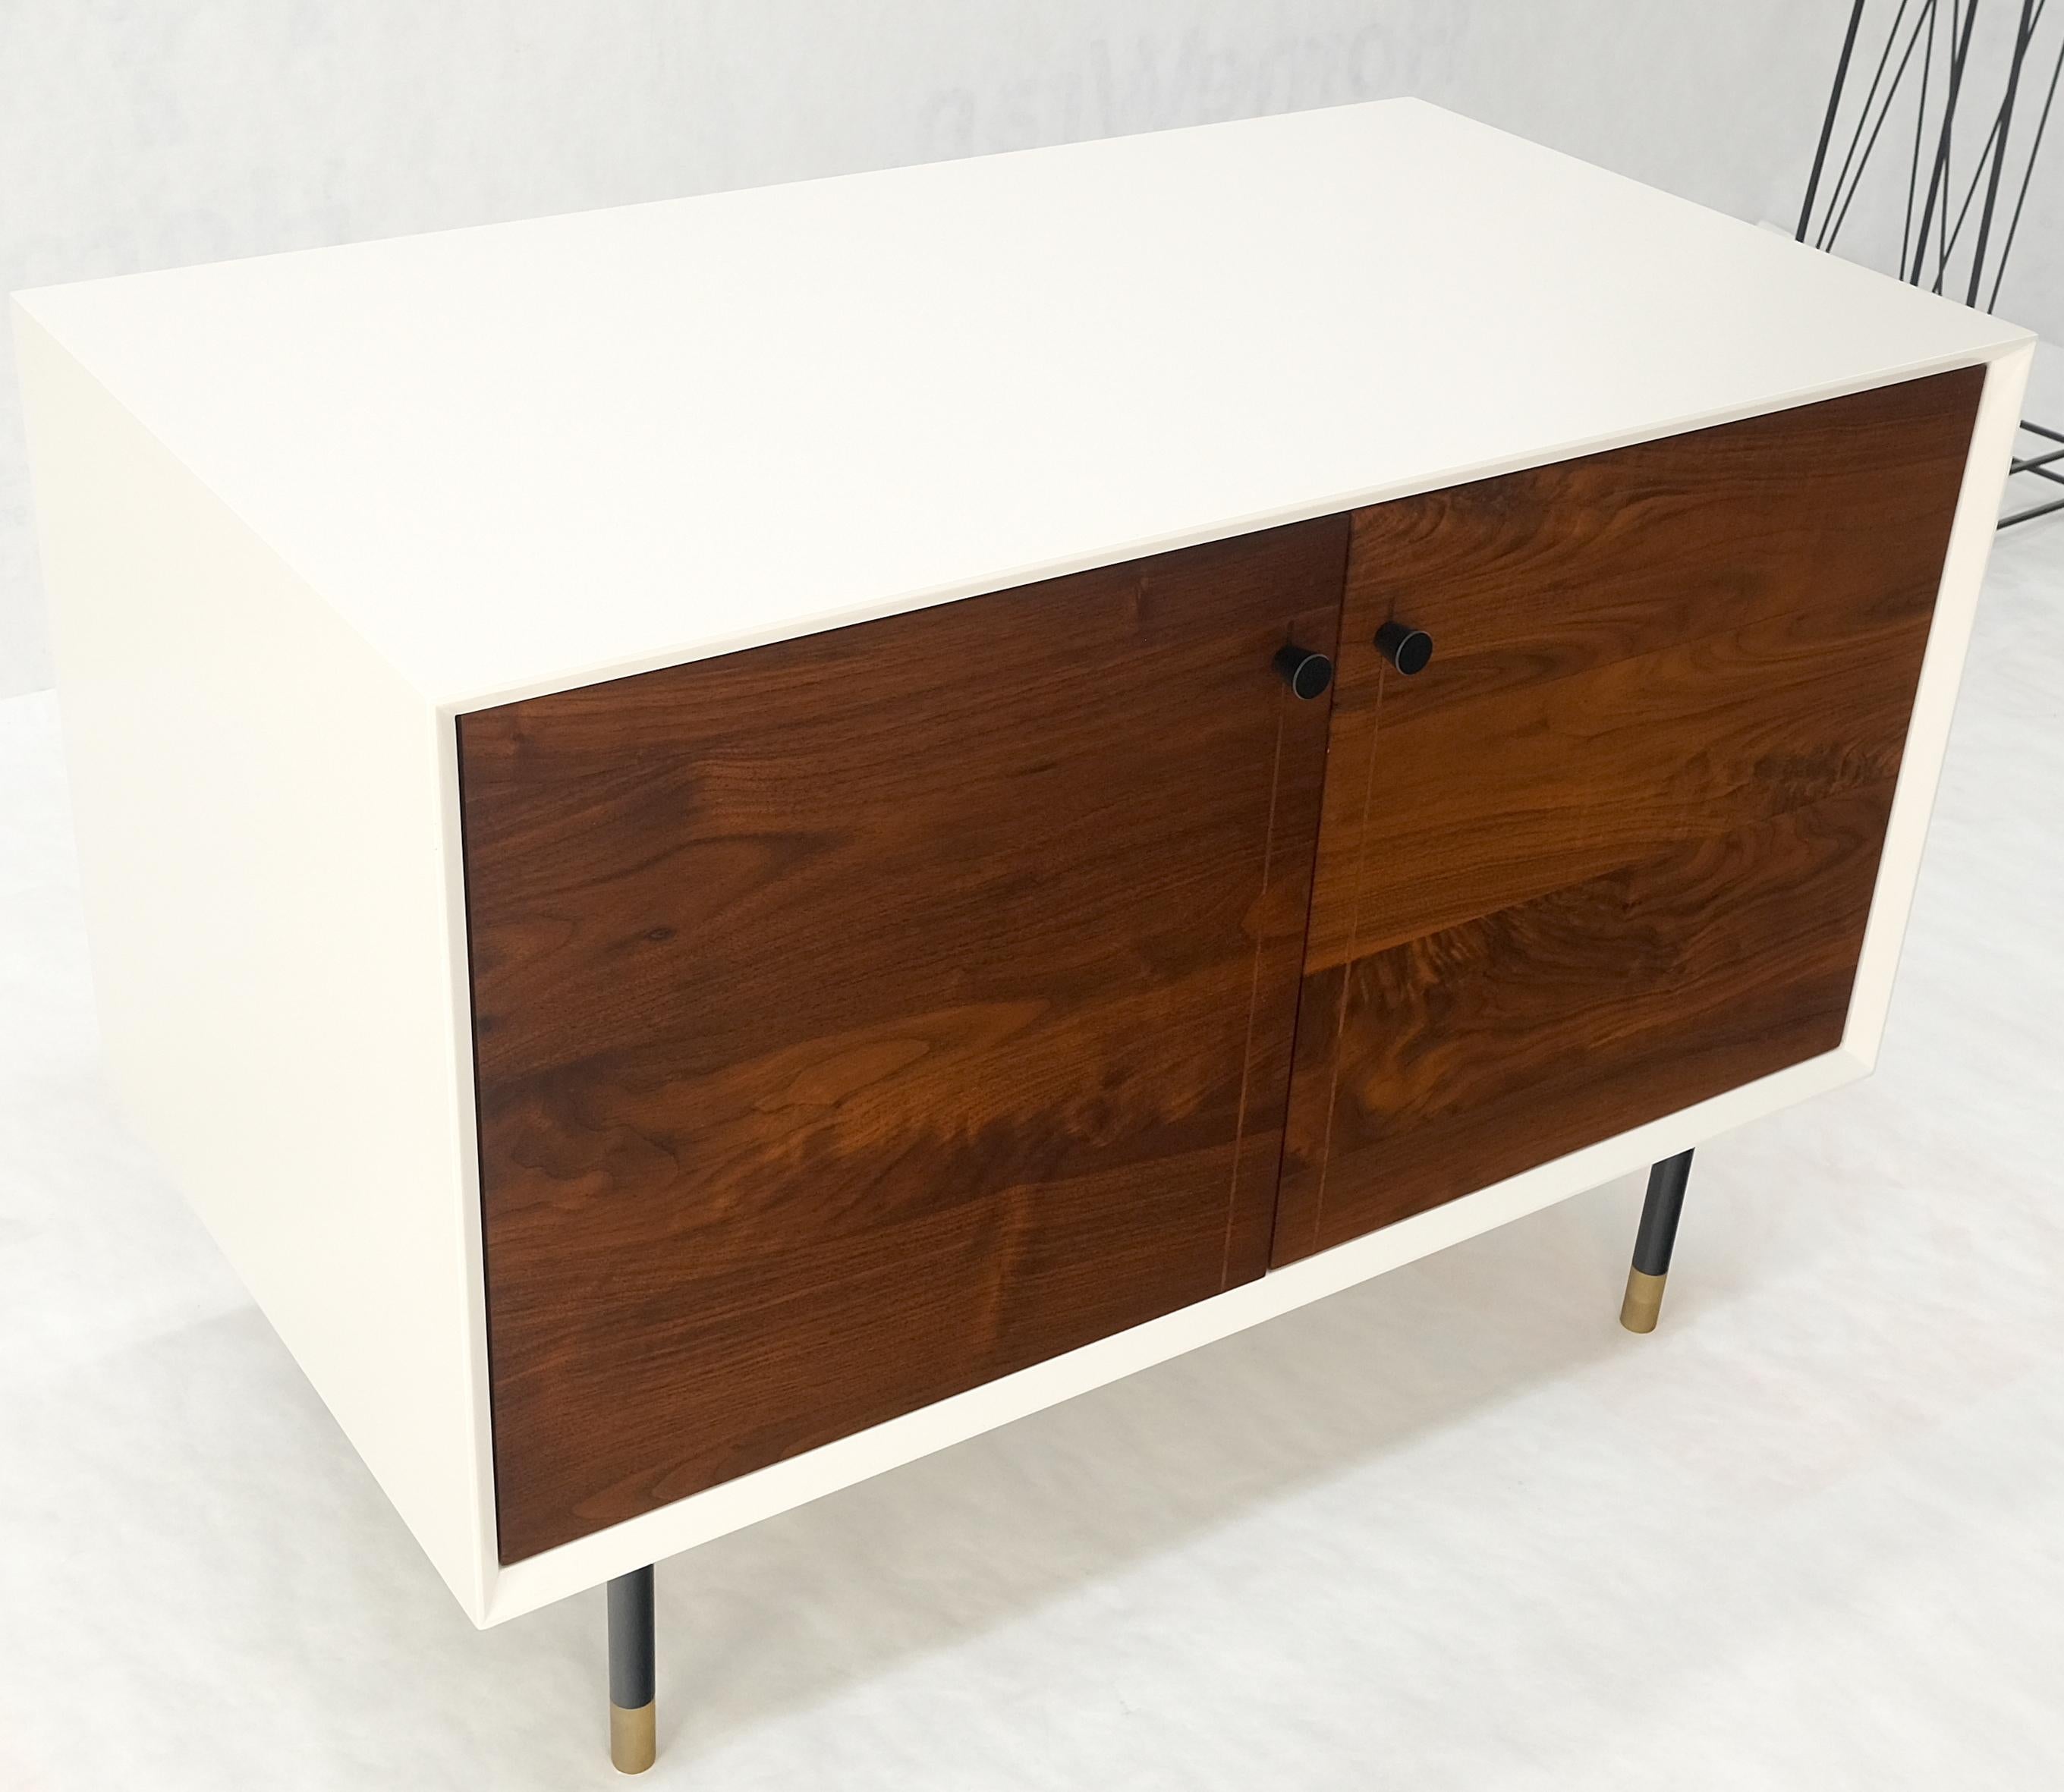 White Lacquer Oiled Walnut Double Door Cylinder Legs Brass Tips Legs Credenza For Sale 2